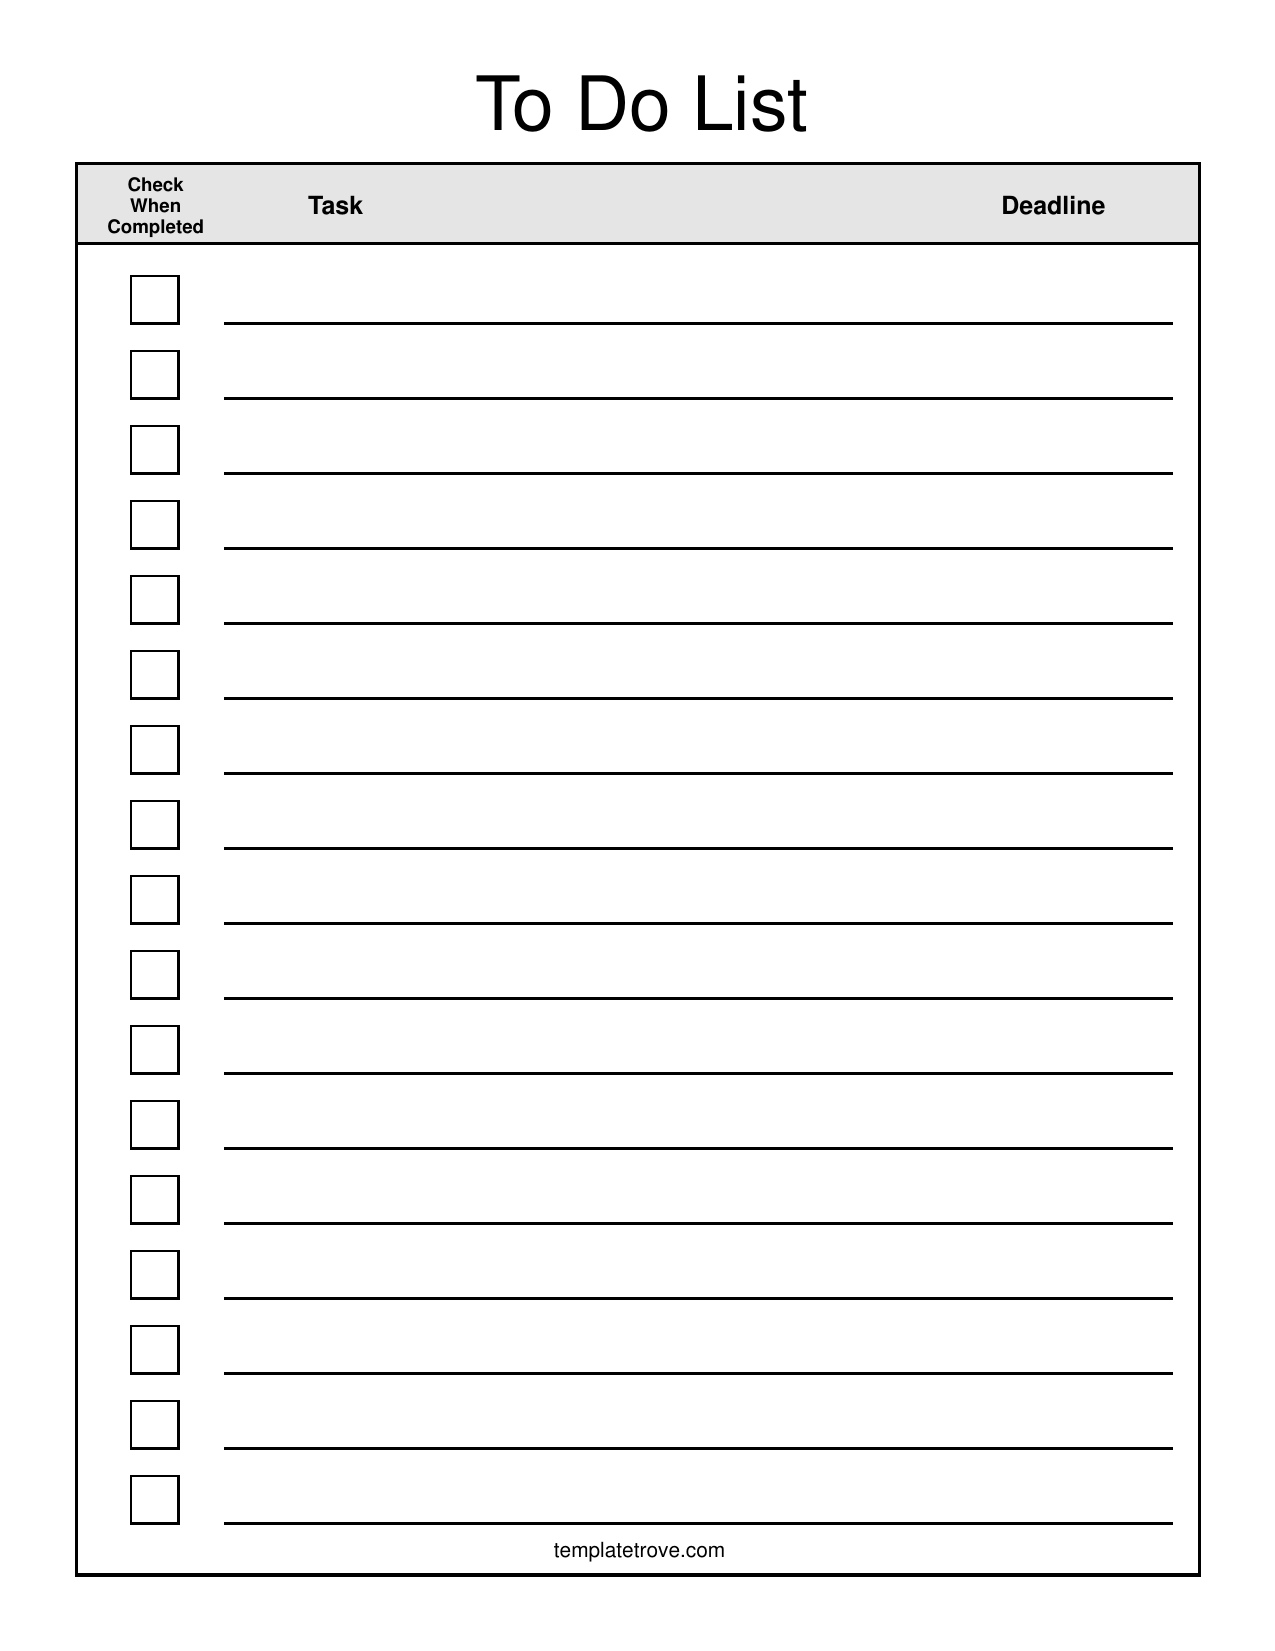 Download To-Do Checklist Template  Excel  PDF  RTF  Word Inside Blank Checklist Template Word